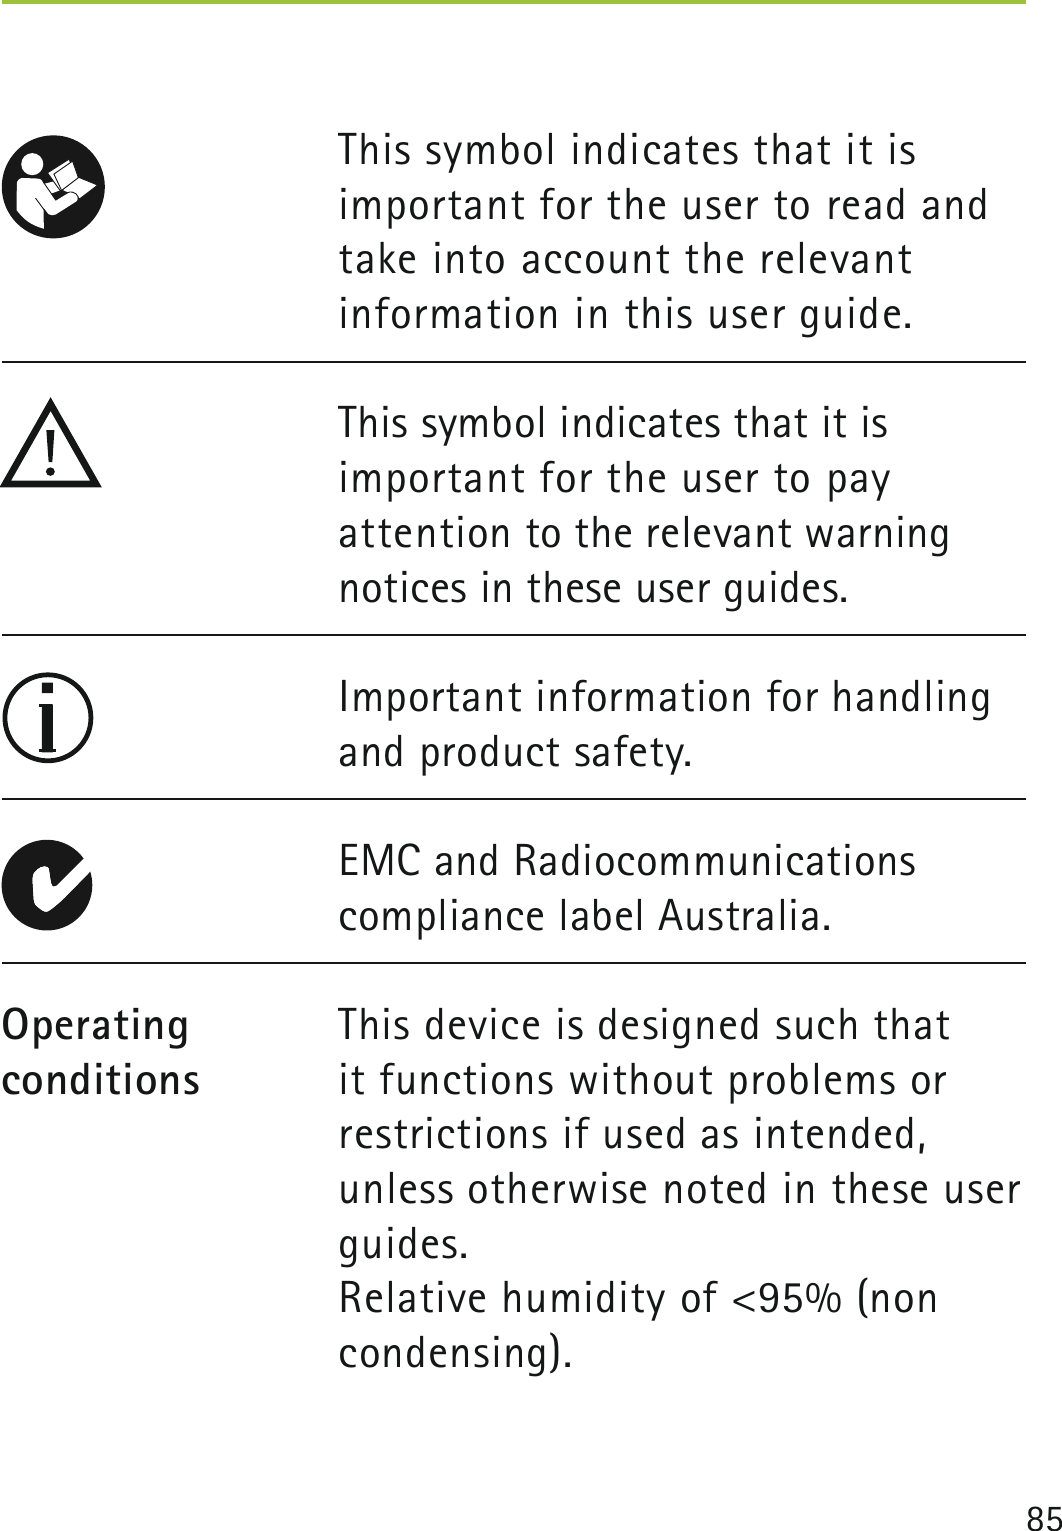 85This symbol indicates that it is important for the user to read and take into account the relevant information in this user guide.This symbol indicates that it is  important for the user to pay  attention to the relevant warning notices in these user guides.Important information for handling and product safety.EMC and Radiocommunications compliance label Australia.This device is designed such that it functions without problems or restrictions if used as intended, unless otherwise noted in these user guides.Relative humidity of &lt;95% (non condensing).Operating conditions  